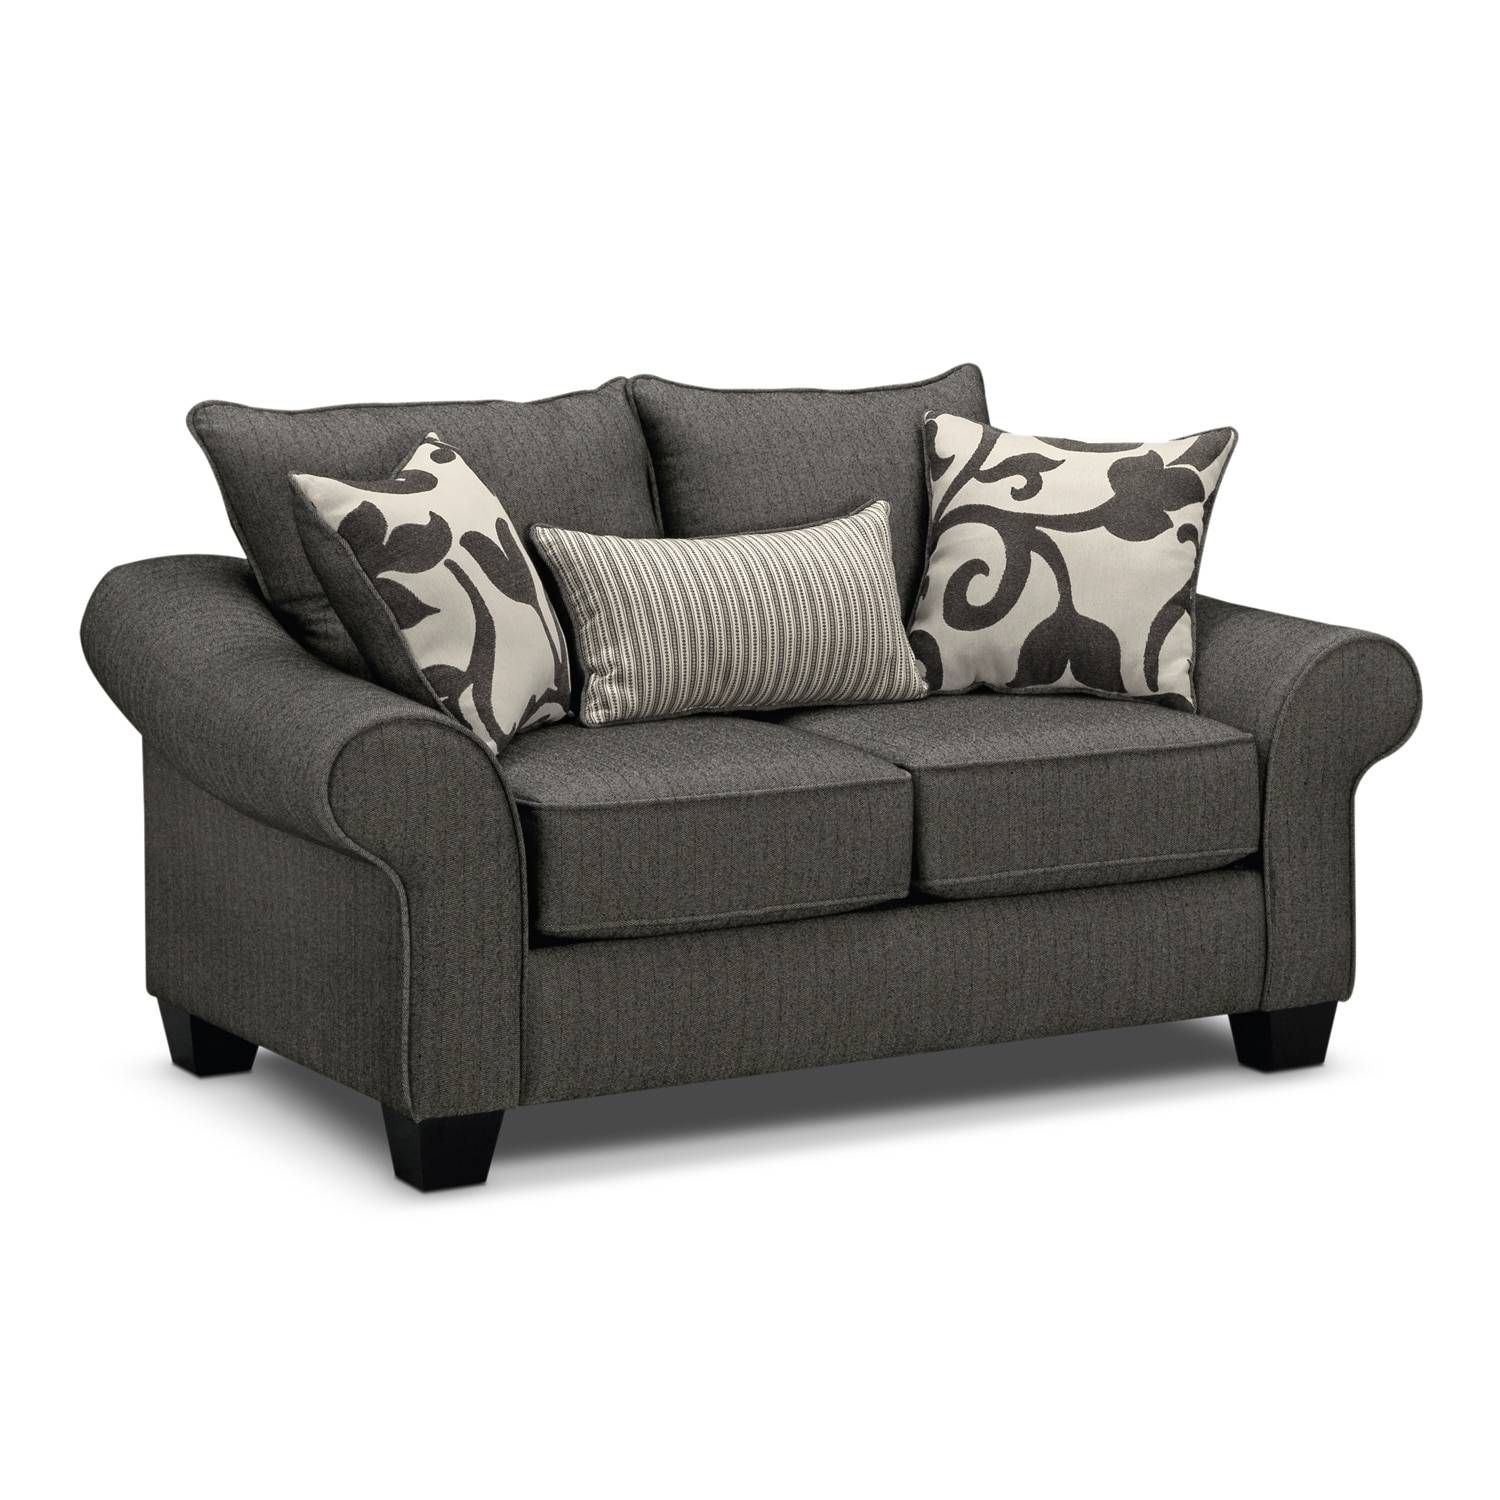 Colette Sofa, Loveseat And Accent Chair Set – Gray | Value City In Sofa And Chair Set (View 21 of 30)